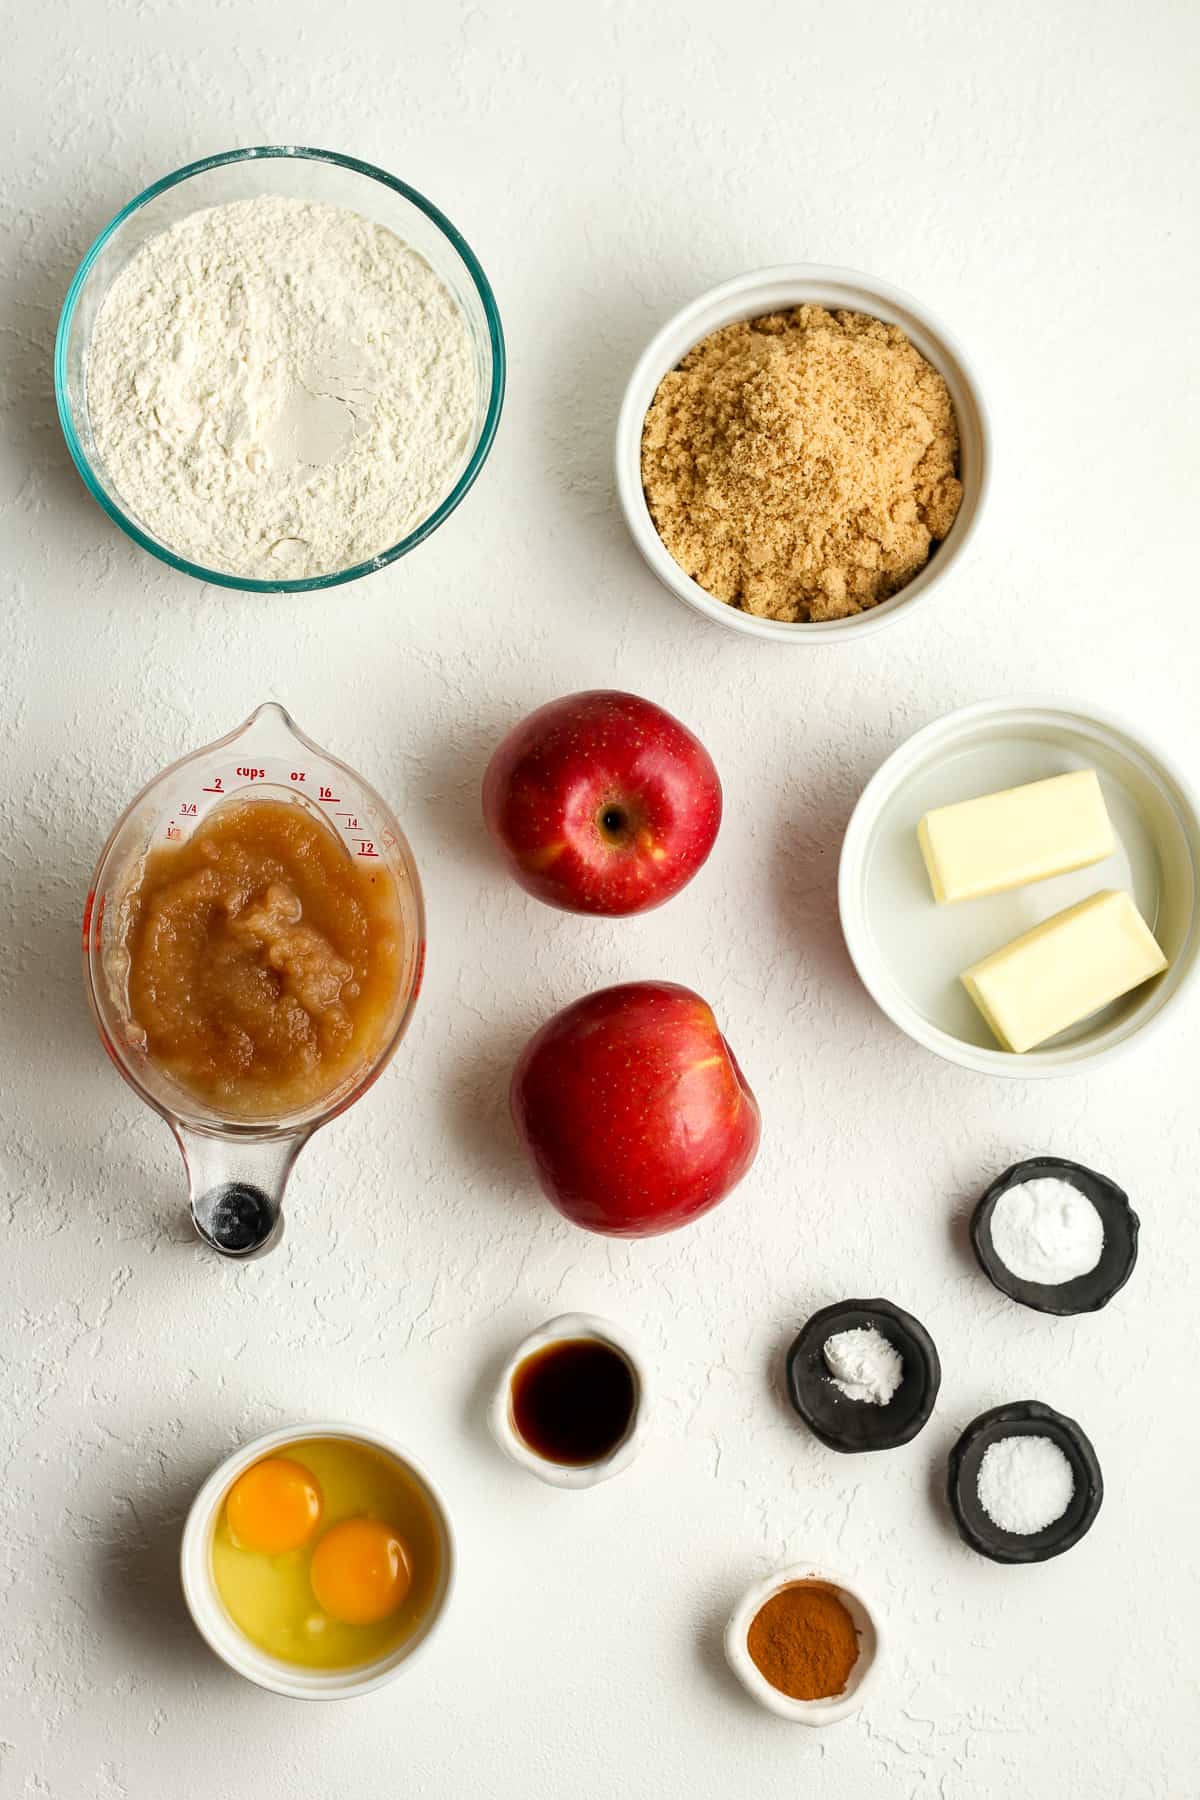 Ingredients for the applesauce cinnamon muffins.